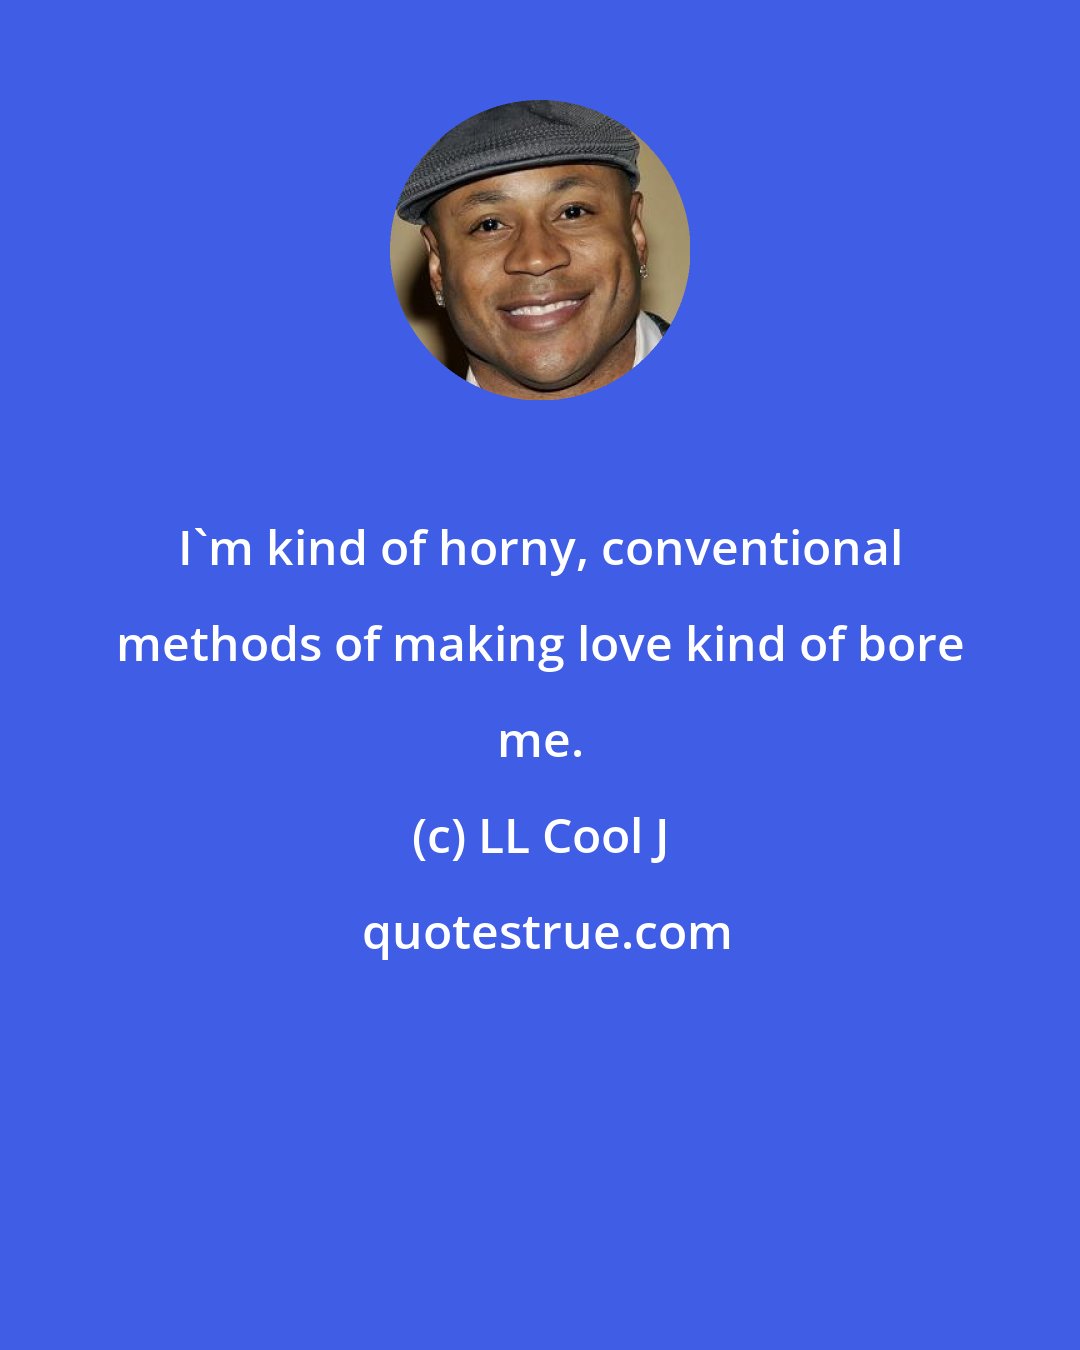 LL Cool J: I'm kind of horny, conventional methods of making love kind of bore me.